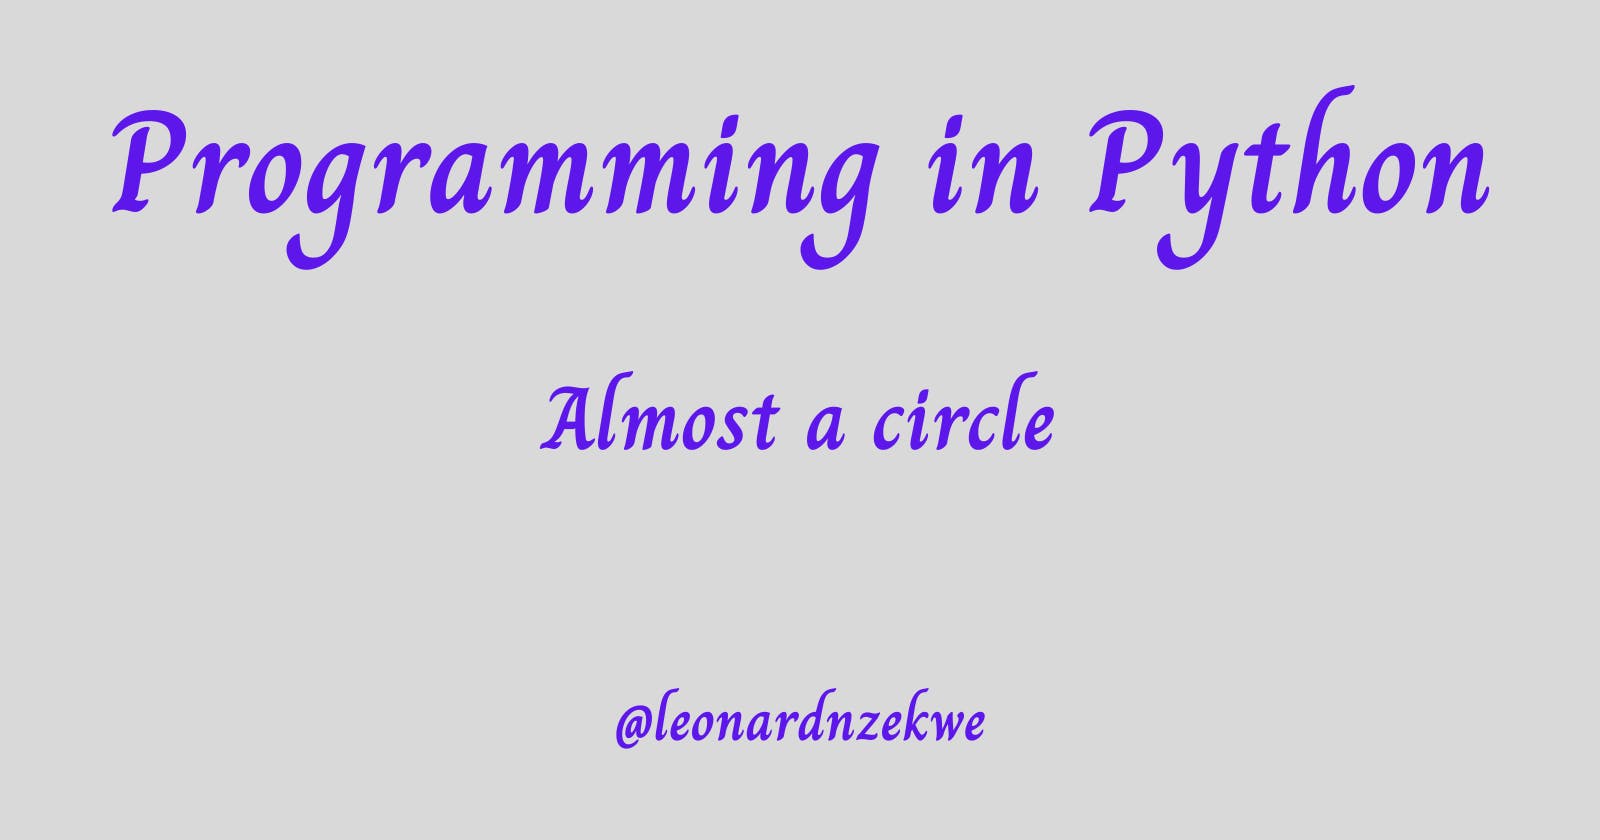 Cover Image for Python's "Almost a Circle": Mastering Serialization, Testing, and Function Arguments